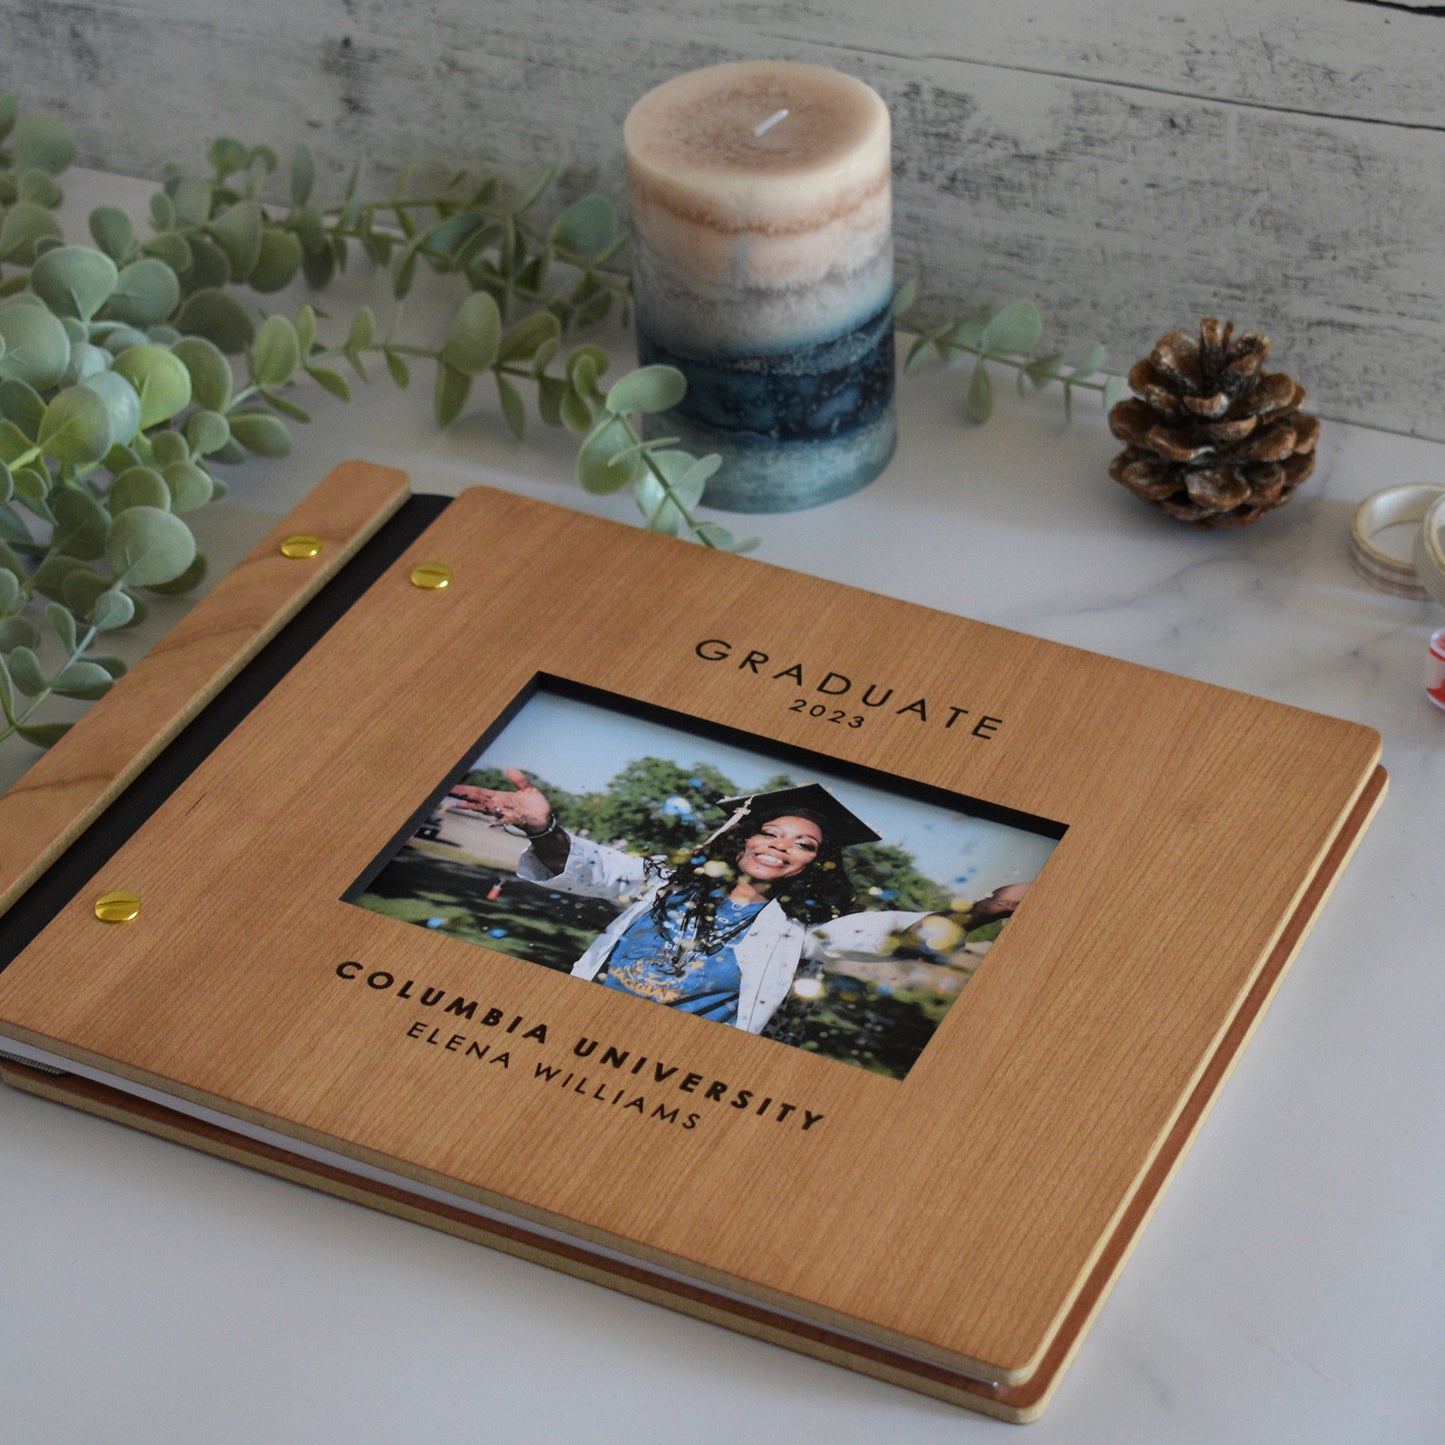 An 8.5x11" sized guest book lies on a table with greenery and a candle. The guest book includes a personalized engraving that reads Graduate 2023 along with the University name and Student name. The guest book also includes a cut out frame with a photo of the graduate.